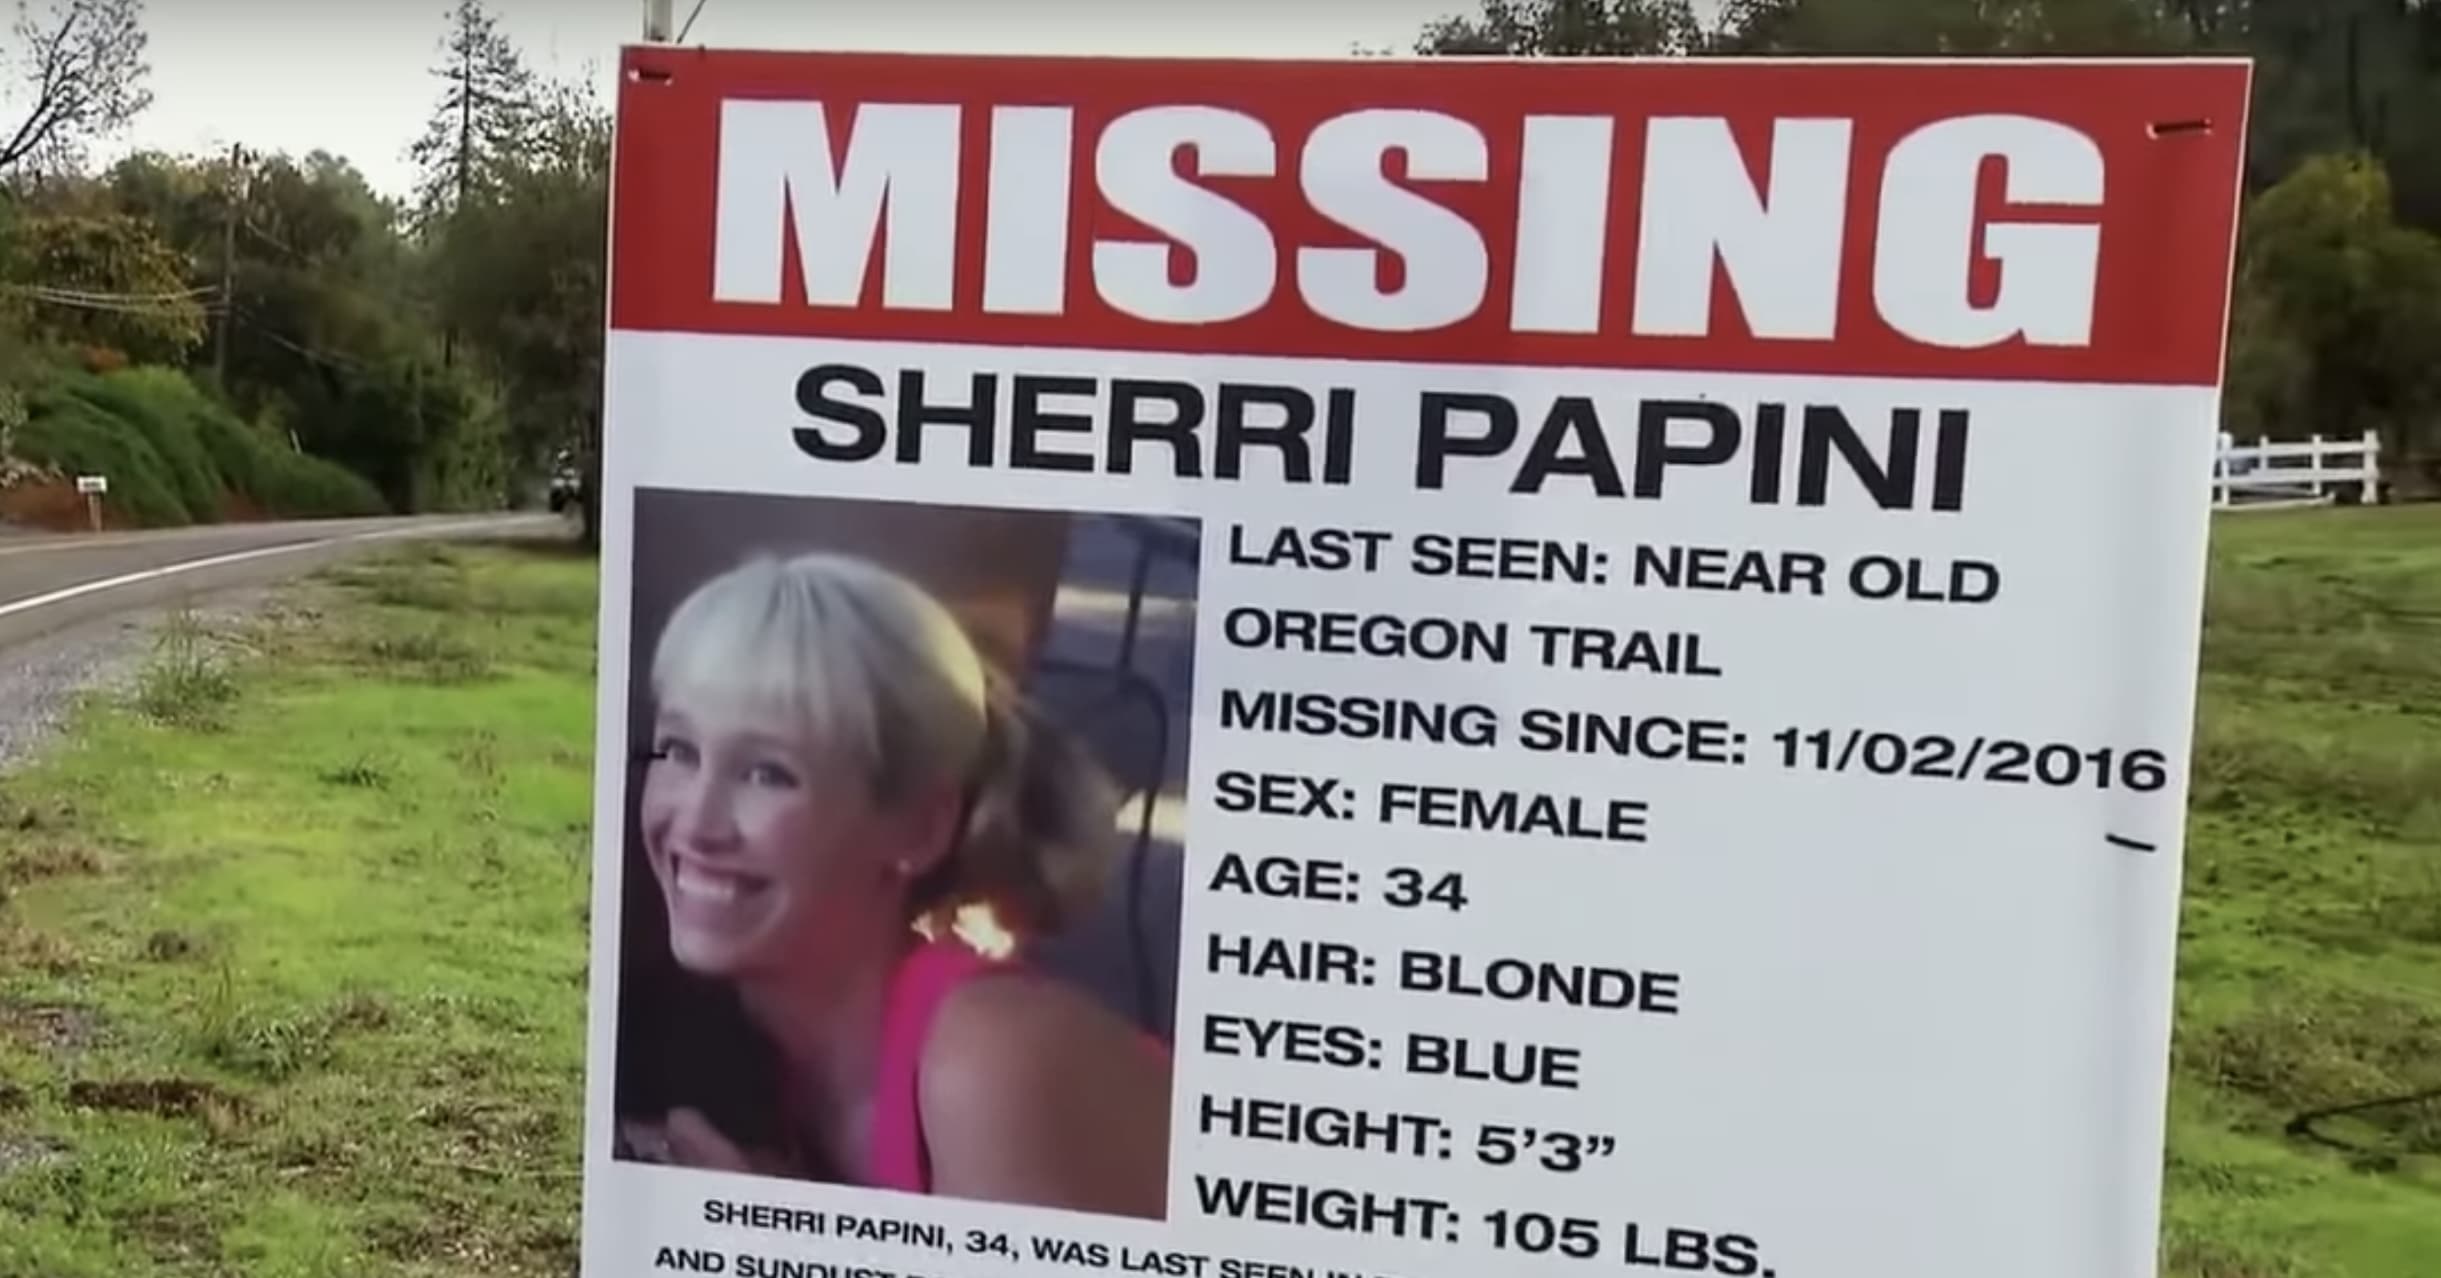 NEW VIDEO Shows Moment Sherri Papini’s Fake Kidnapping Hoax Unravels 